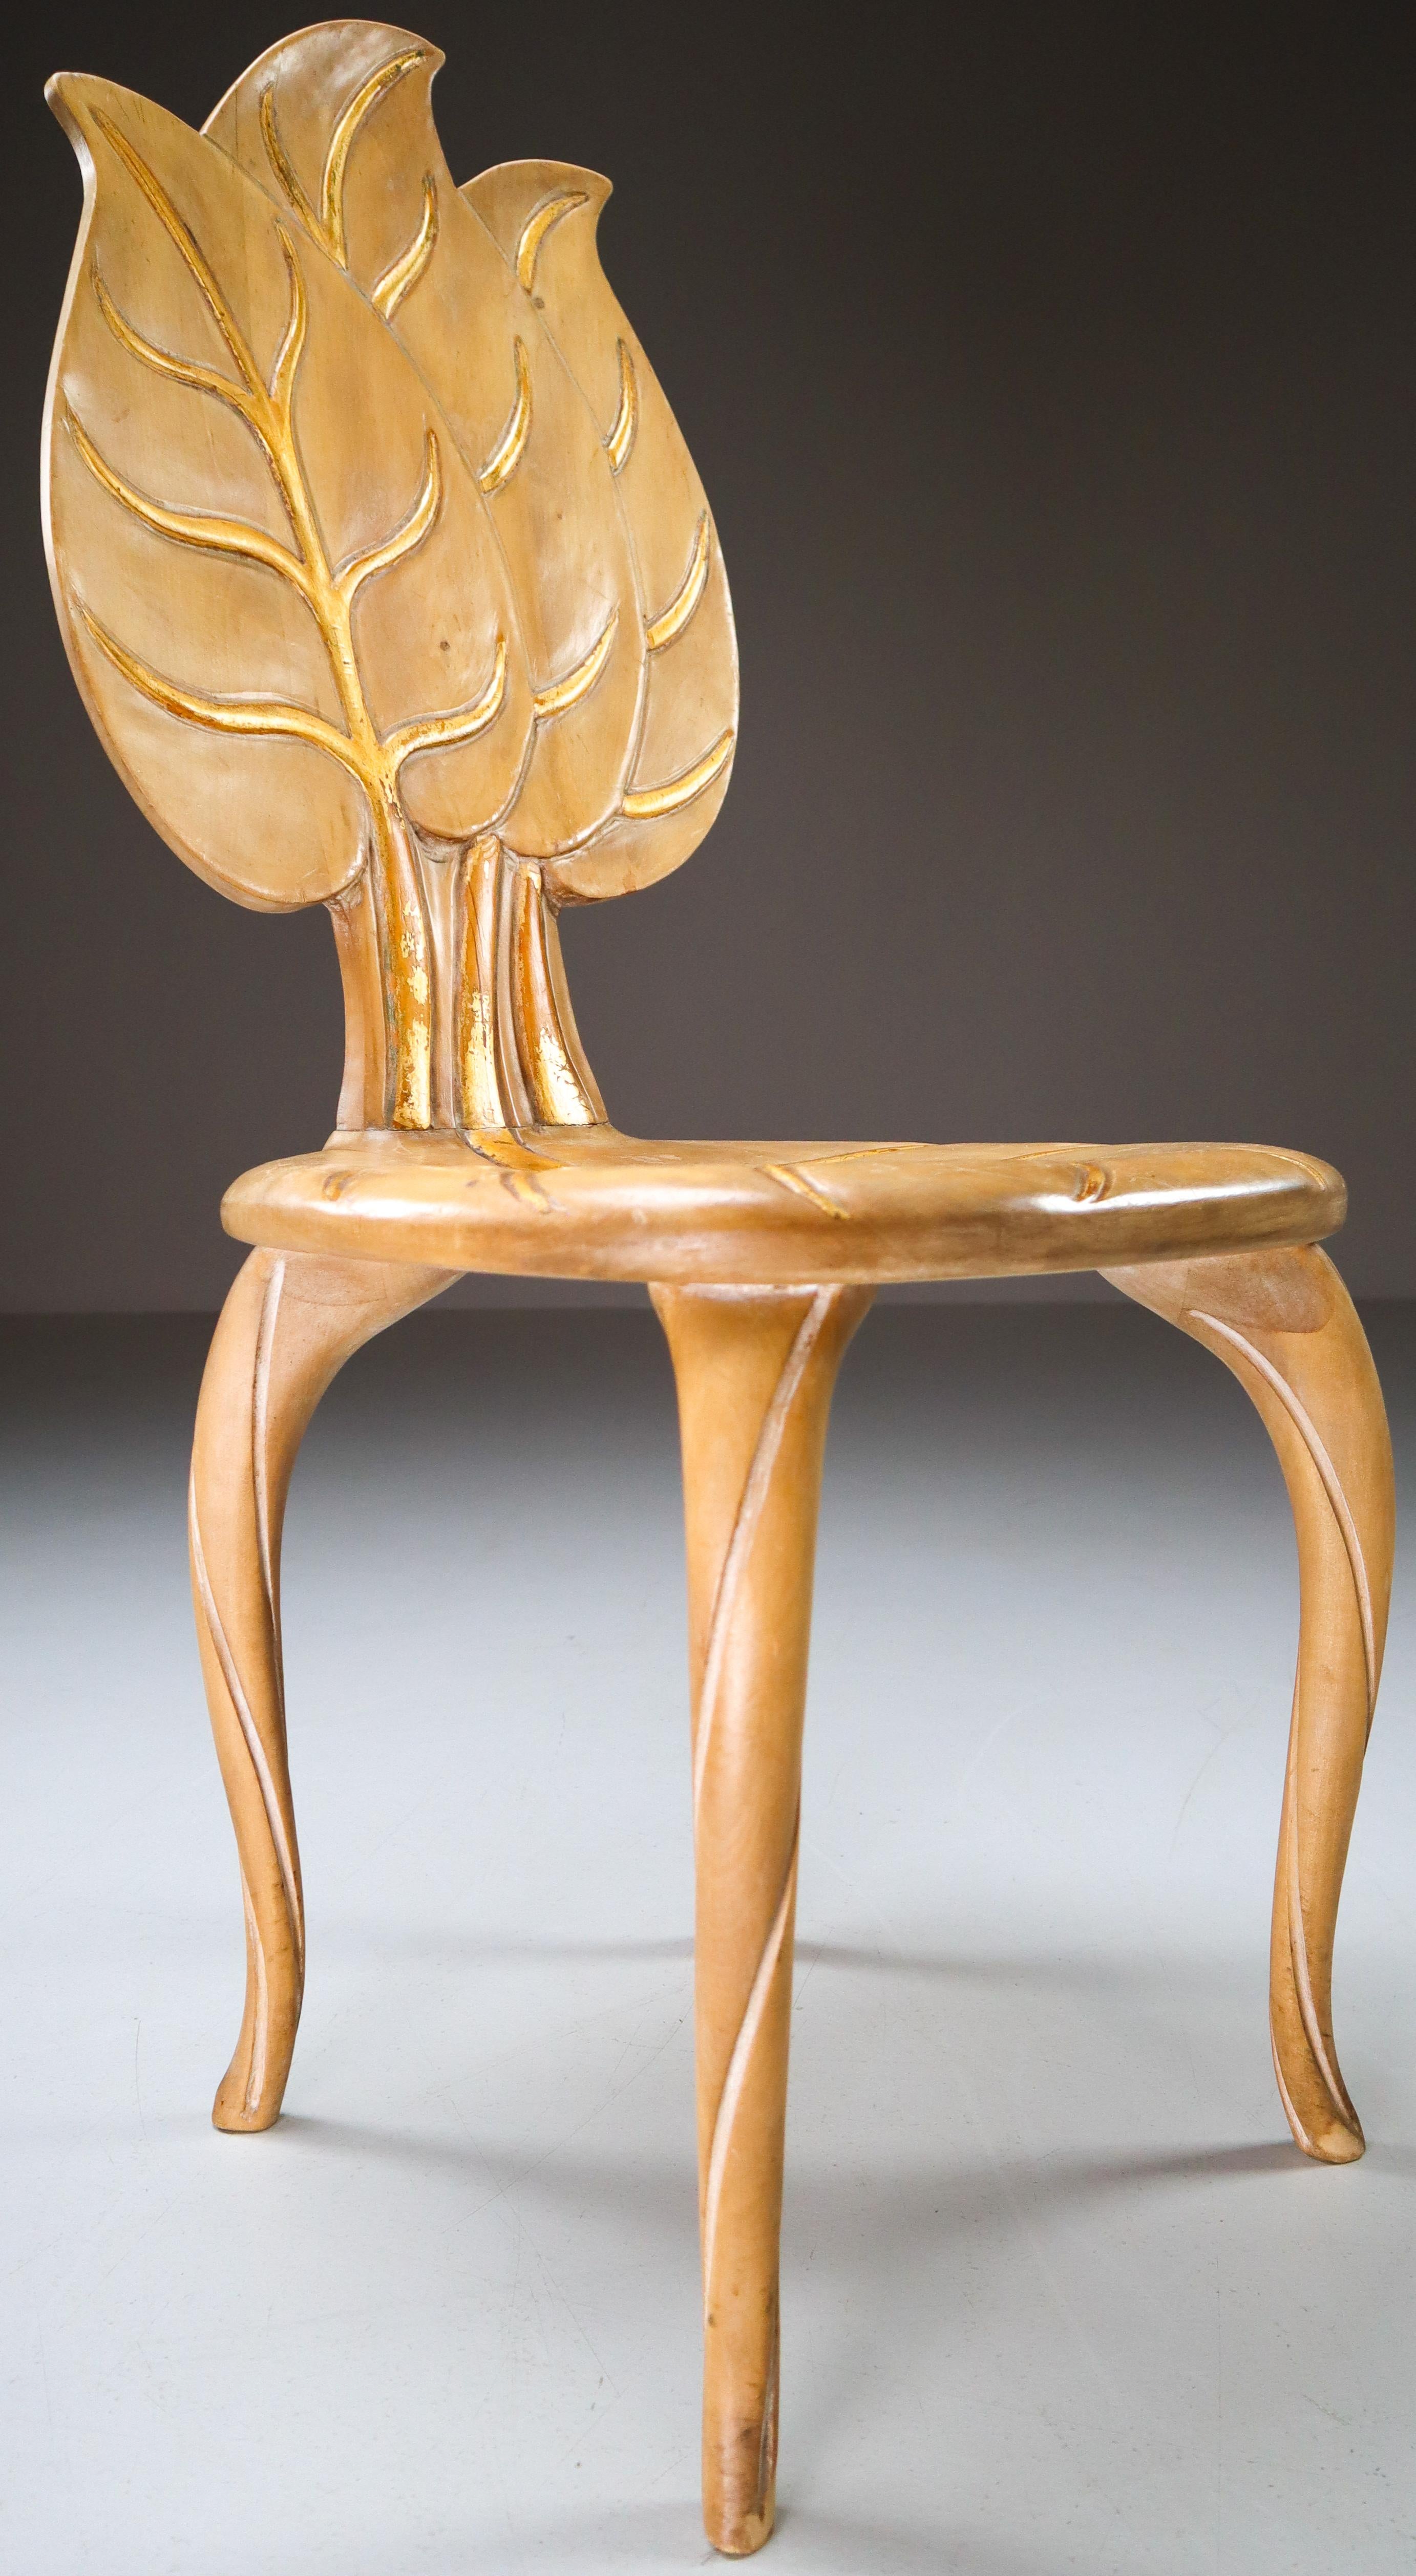 20th Century Bartolozzi & Maioli Wooden and Gold Leaf Chair, Italy, 1970s For Sale